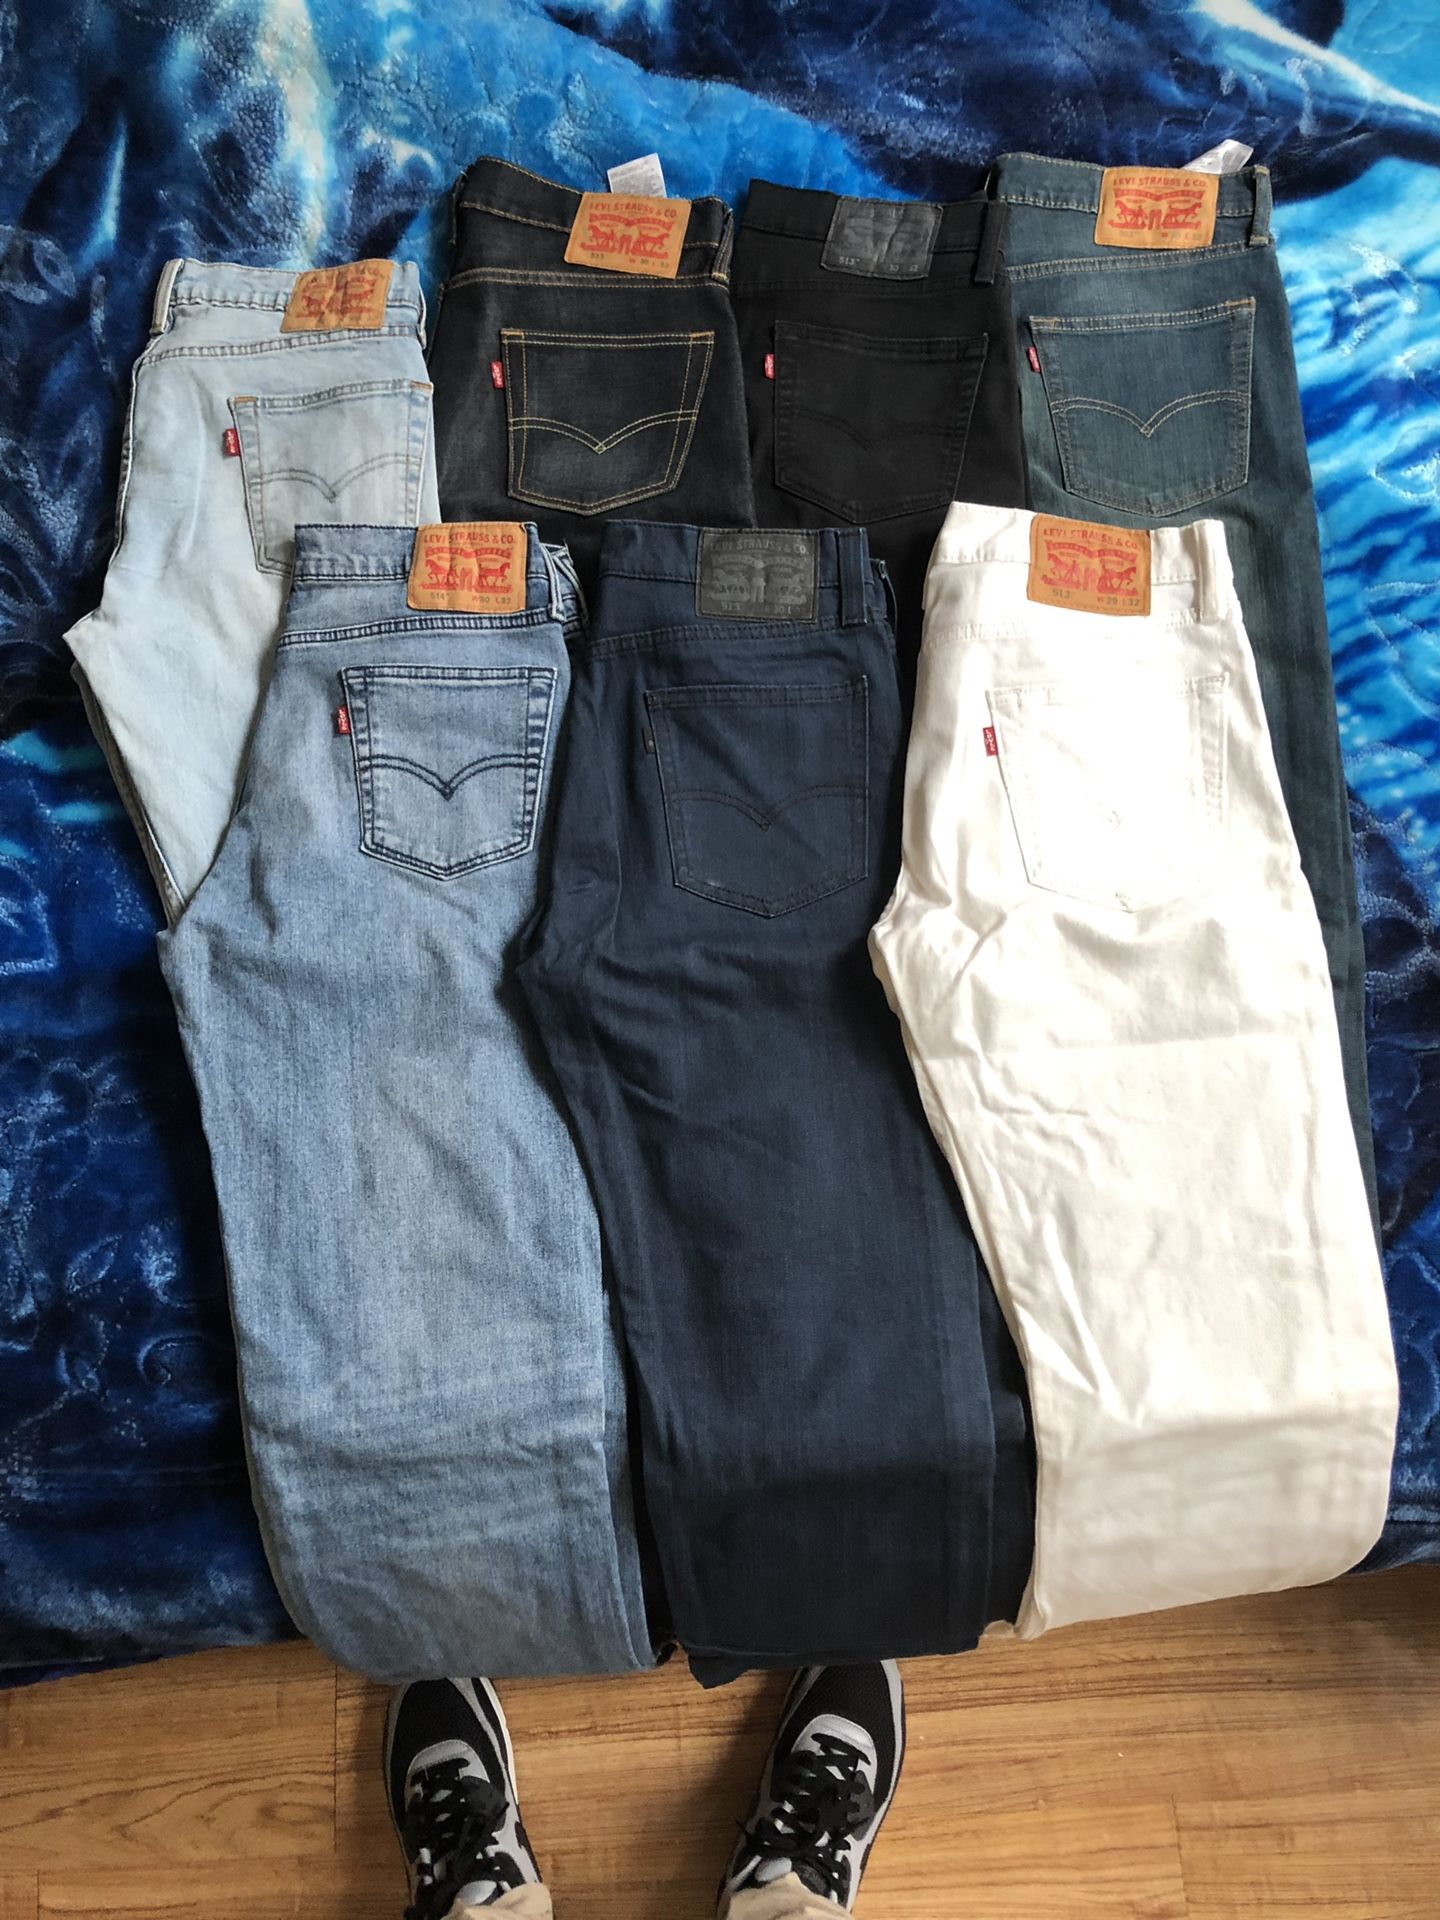 7 Pairs of Levi’s (513 style W30/L32) pants for $110. Which three of the pants are new. Also Chicago Bears NFL Gold 50 anniversary sweatsuit (which f